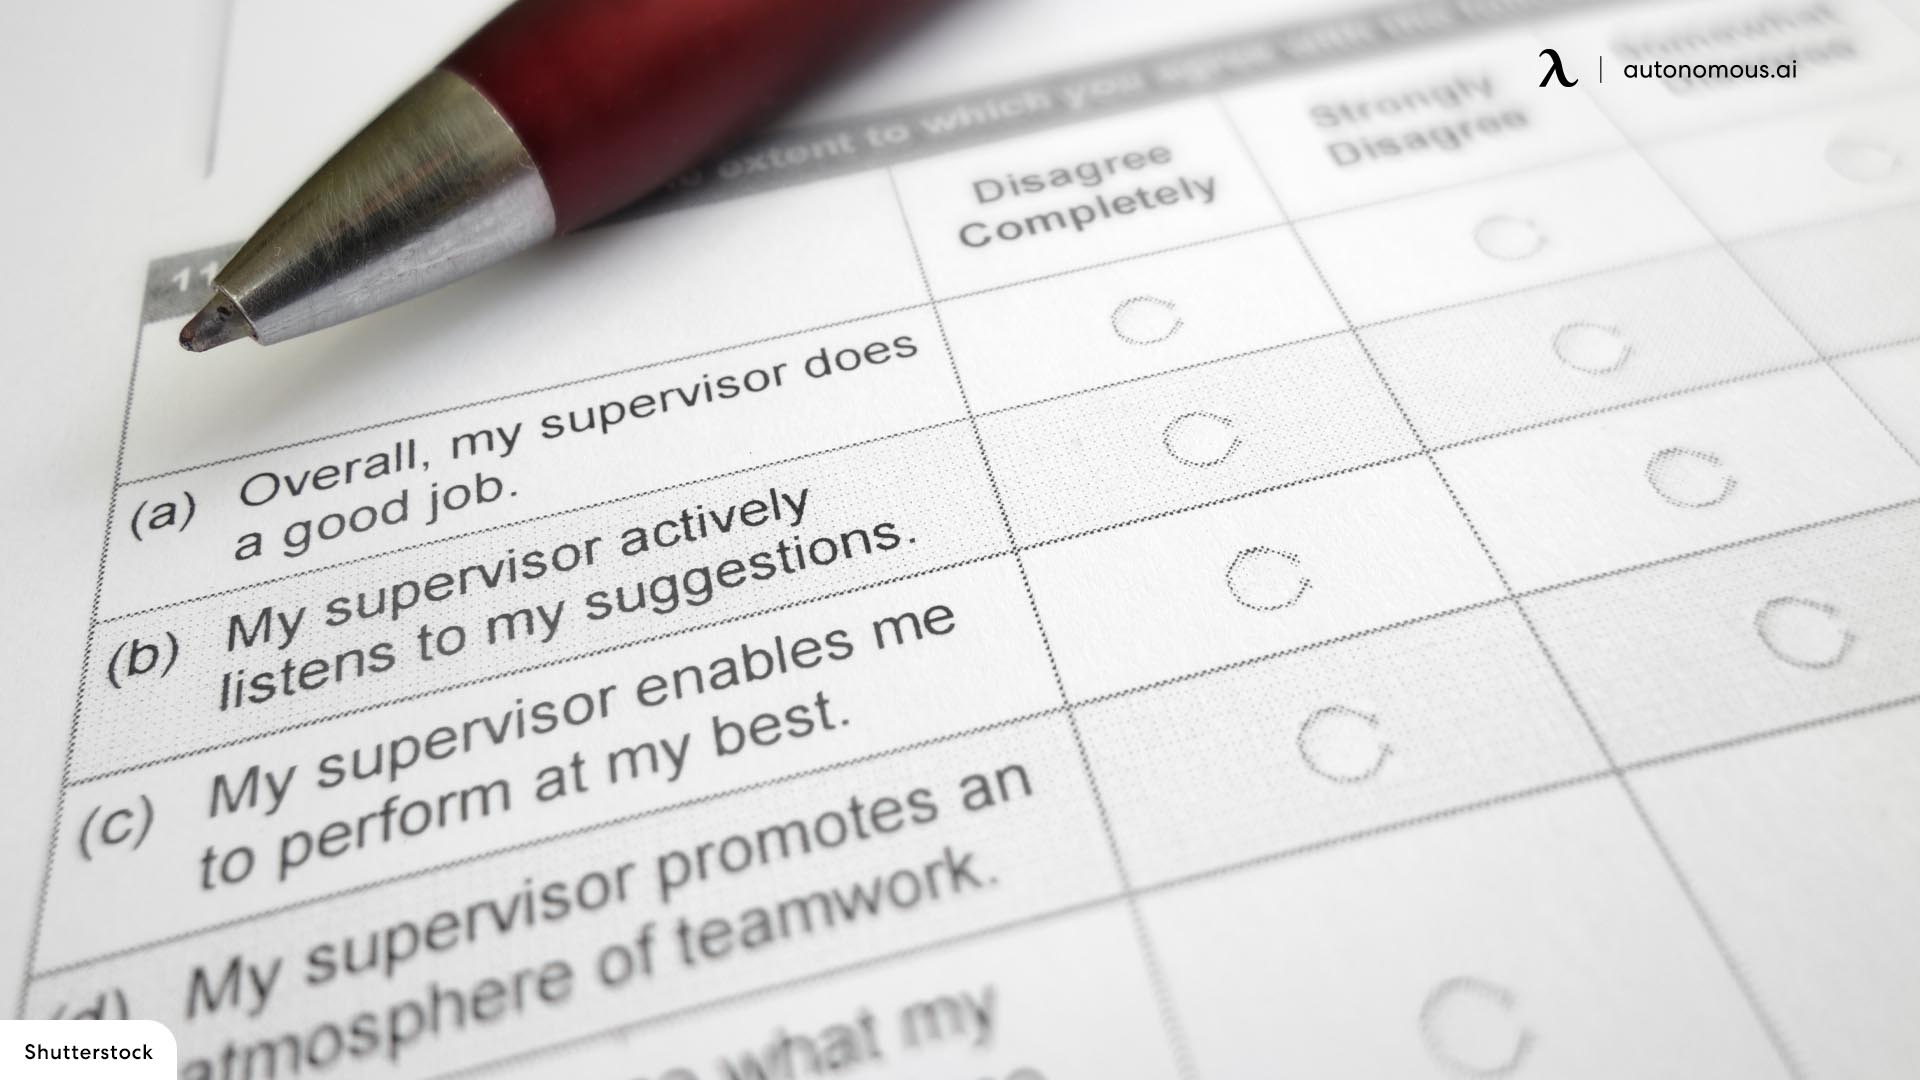 What Questions Should I Include in an Employee Wellness Survey